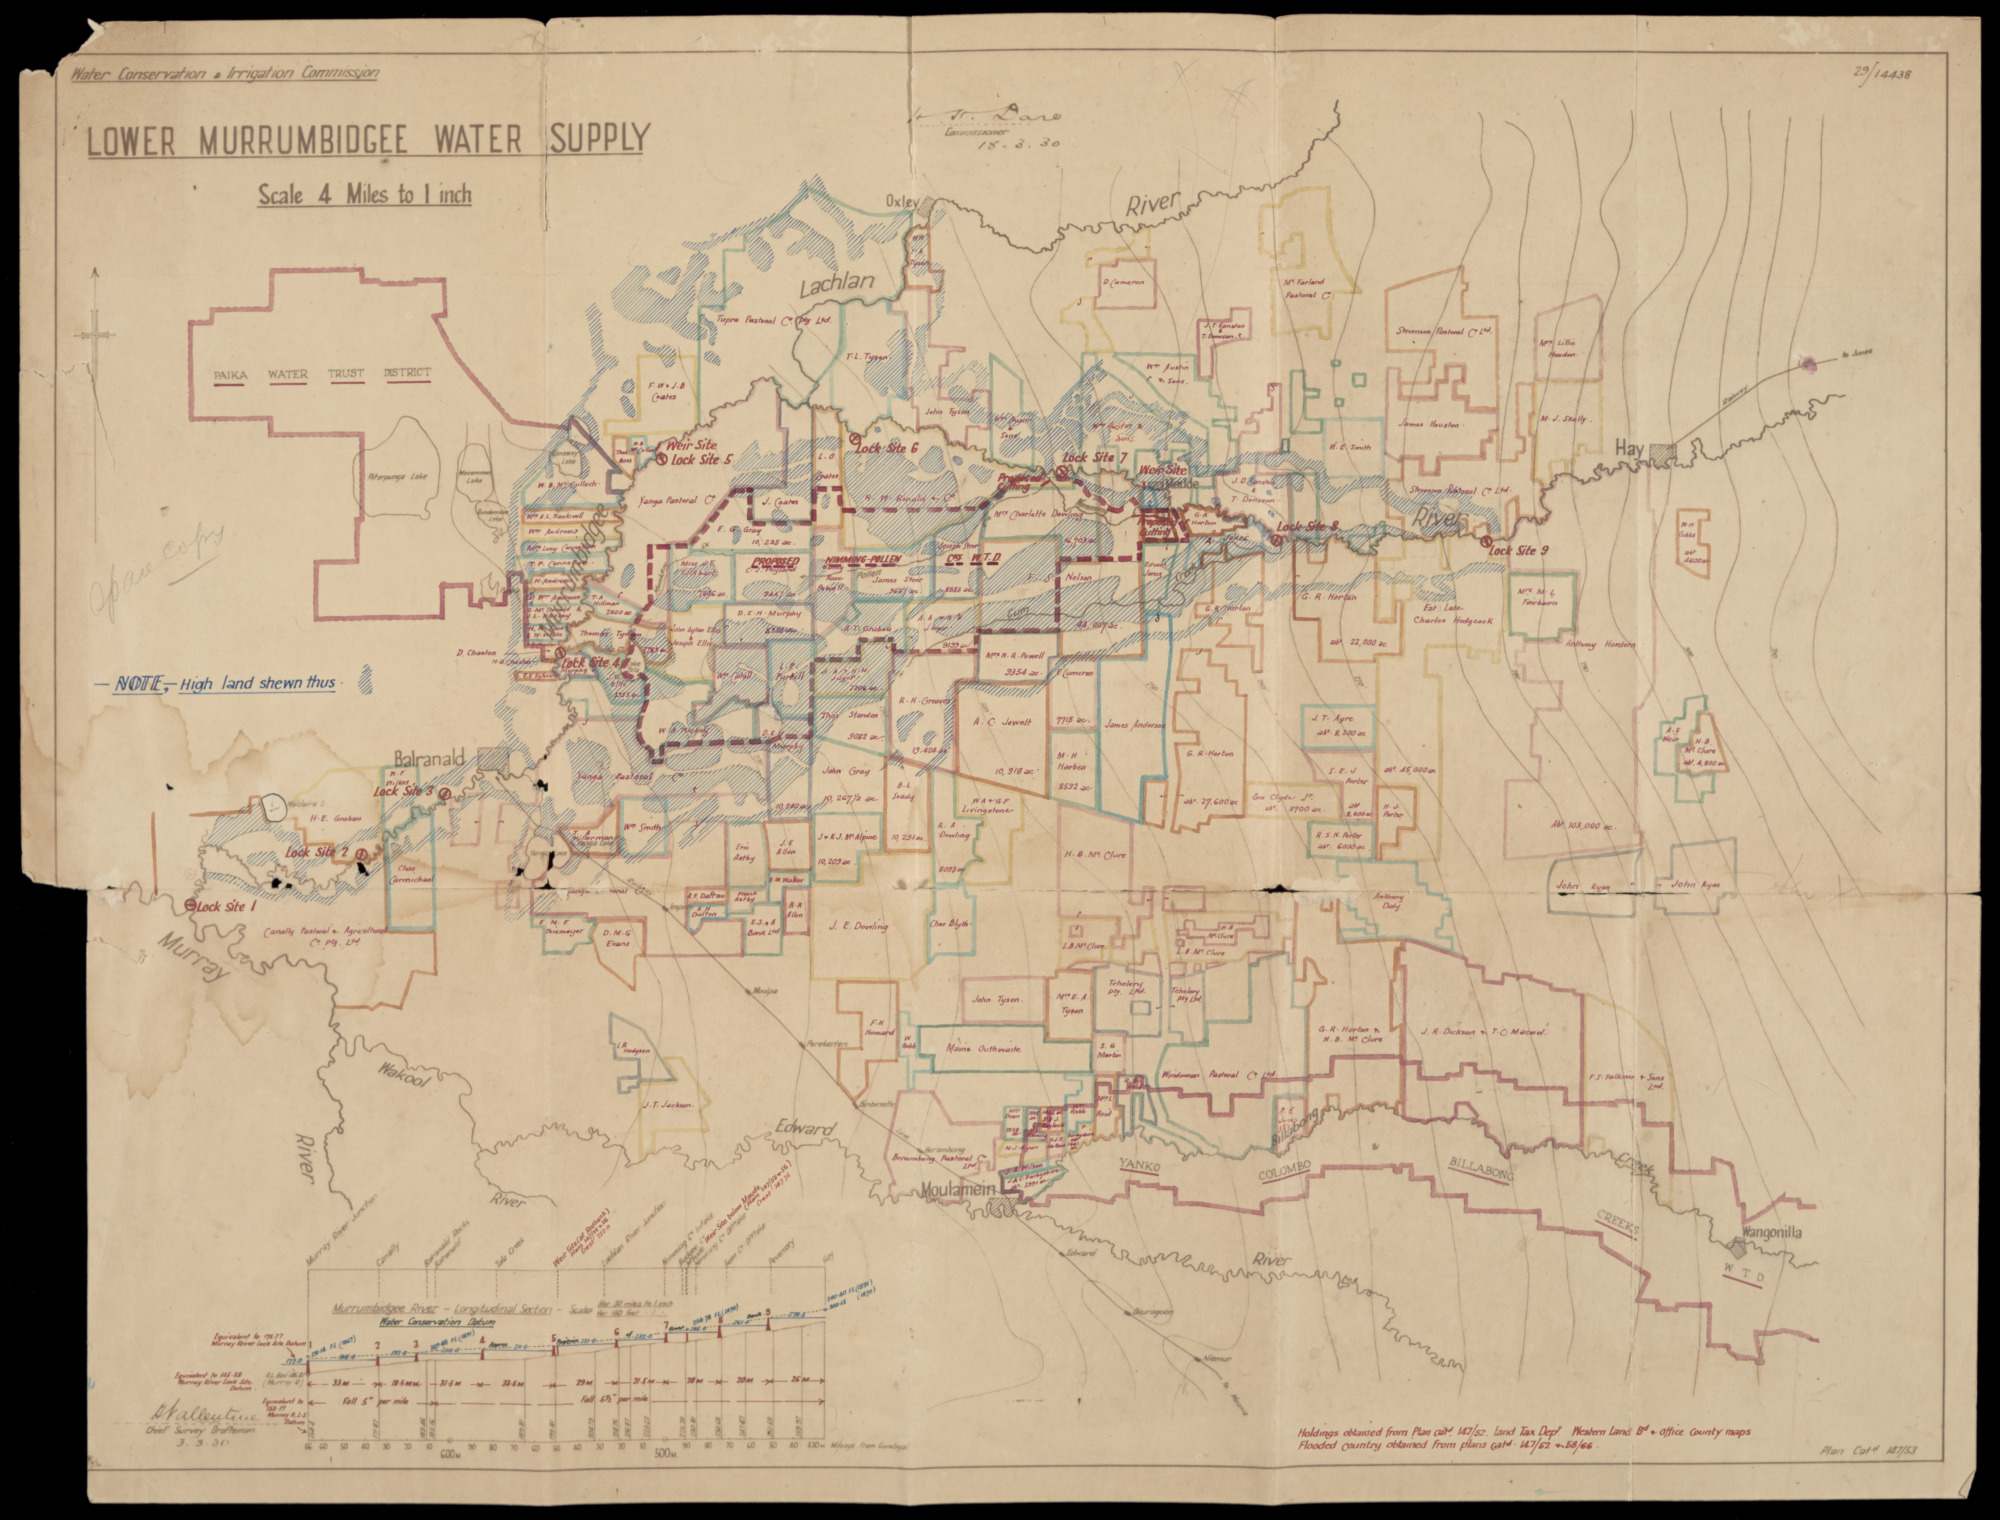 Map titled: Lower Murrumbidgee Water Supply. The map shows holding lots of landowners in detail, 18 March 1930. 